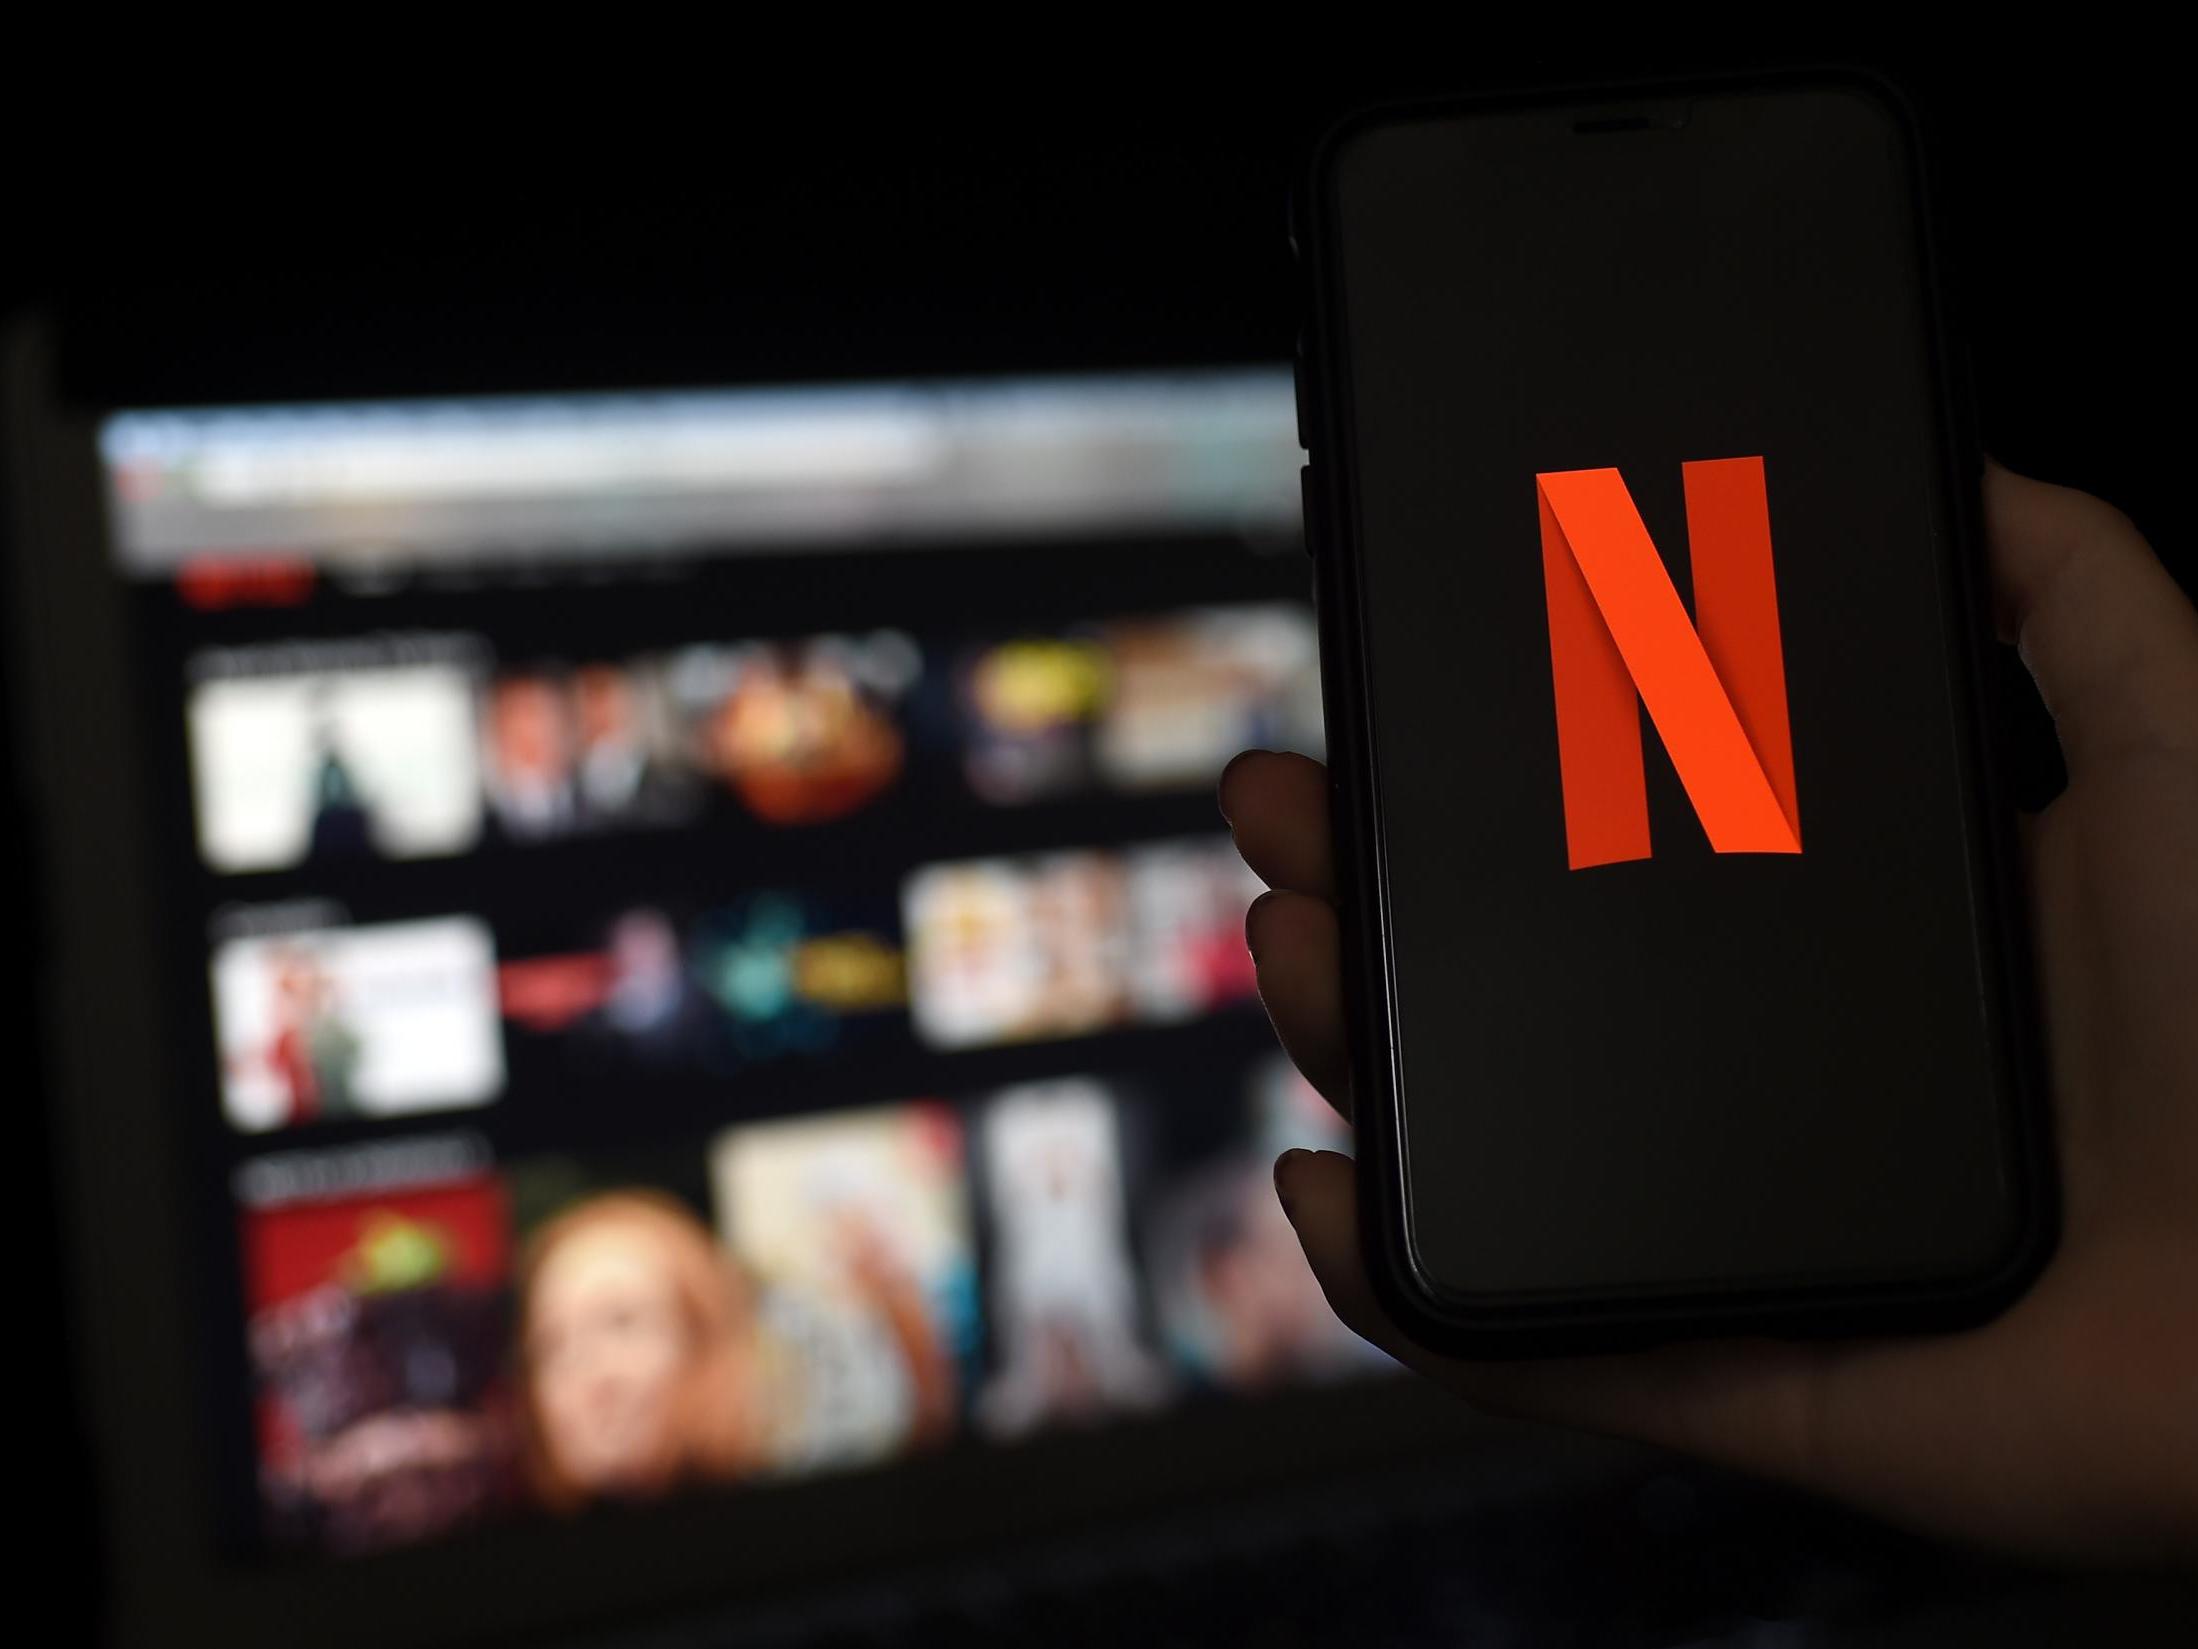 During the pandemic, people have increasingly turned to streaming services like Netflix